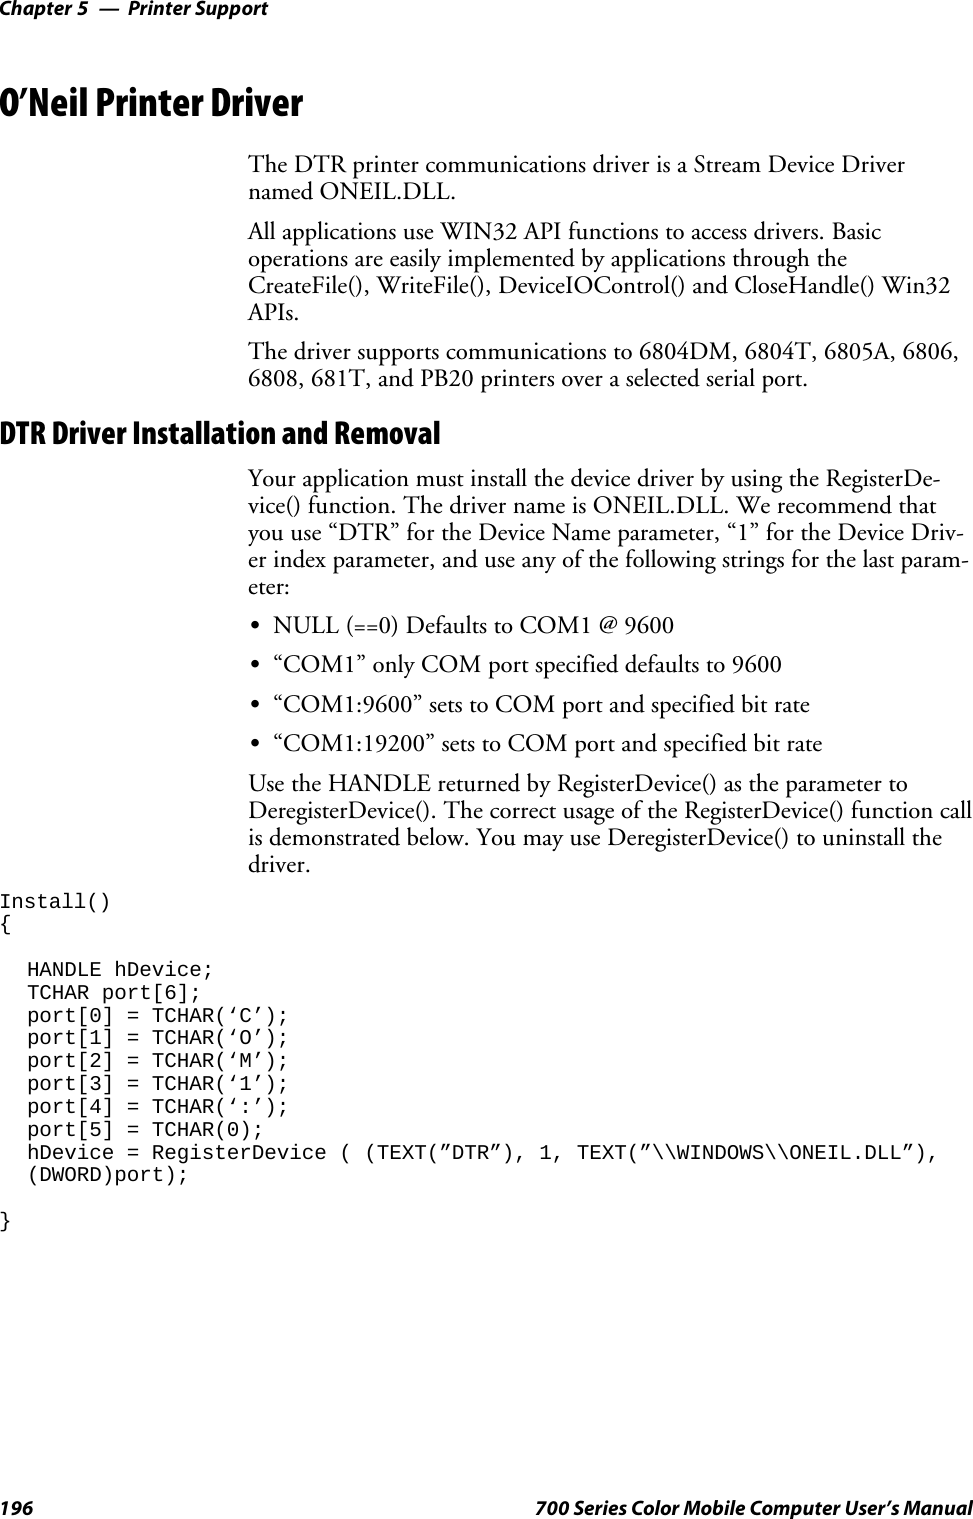 Printer SupportChapter —5196 700 Series Color Mobile Computer User’s ManualO’Neil Printer DriverThe DTR printer communications driver is a Stream Device Drivernamed ONEIL.DLL.All applications use WIN32 API functions to access drivers. Basicoperations are easily implemented by applications through theCreateFile(), WriteFile(), DeviceIOControl() and CloseHandle() Win32APIs.The driver supports communications to 6804DM, 6804T, 6805A, 6806,6808, 681T, and PB20 printers over a selected serial port.DTR Driver Installation and RemovalYour application must install the device driver by using the RegisterDe-vice() function. The driver name is ONEIL.DLL. We recommend thatyou use “DTR” for the Device Name parameter, “1” for the Device Driv-er index parameter, and use any of the following strings for the last param-eter:SNULL (==0) Defaults to COM1 @ 9600S“COM1” only COM port specified defaults to 9600S“COM1:9600” sets to COM port and specified bit rateS“COM1:19200” sets to COM port and specified bit rateUse the HANDLE returned by RegisterDevice() as the parameter toDeregisterDevice(). The correct usage of the RegisterDevice() function callis demonstrated below. You may use DeregisterDevice() to uninstall thedriver.Install(){HANDLE hDevice;TCHAR port[6];port[0] = TCHAR(‘C’);port[1] = TCHAR(‘O’);port[2] = TCHAR(‘M’);port[3] = TCHAR(‘1’);port[4] = TCHAR(‘:’);port[5] = TCHAR(0);hDevice = RegisterDevice ( (TEXT(”DTR”), 1, TEXT(”\\WINDOWS\\ONEIL.DLL”),(DWORD)port);}